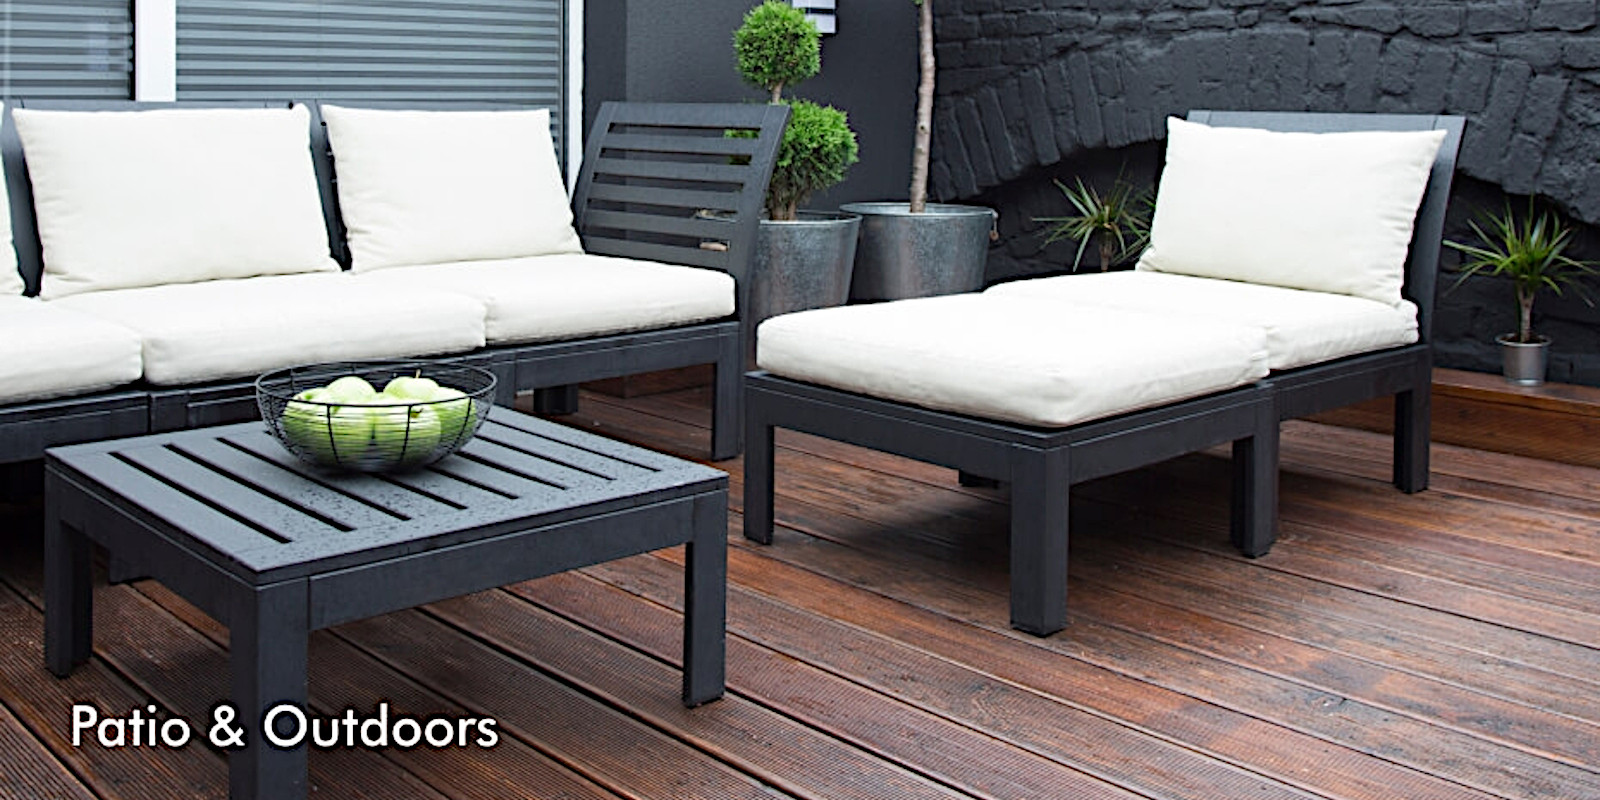 Patio furniture at a reduced price